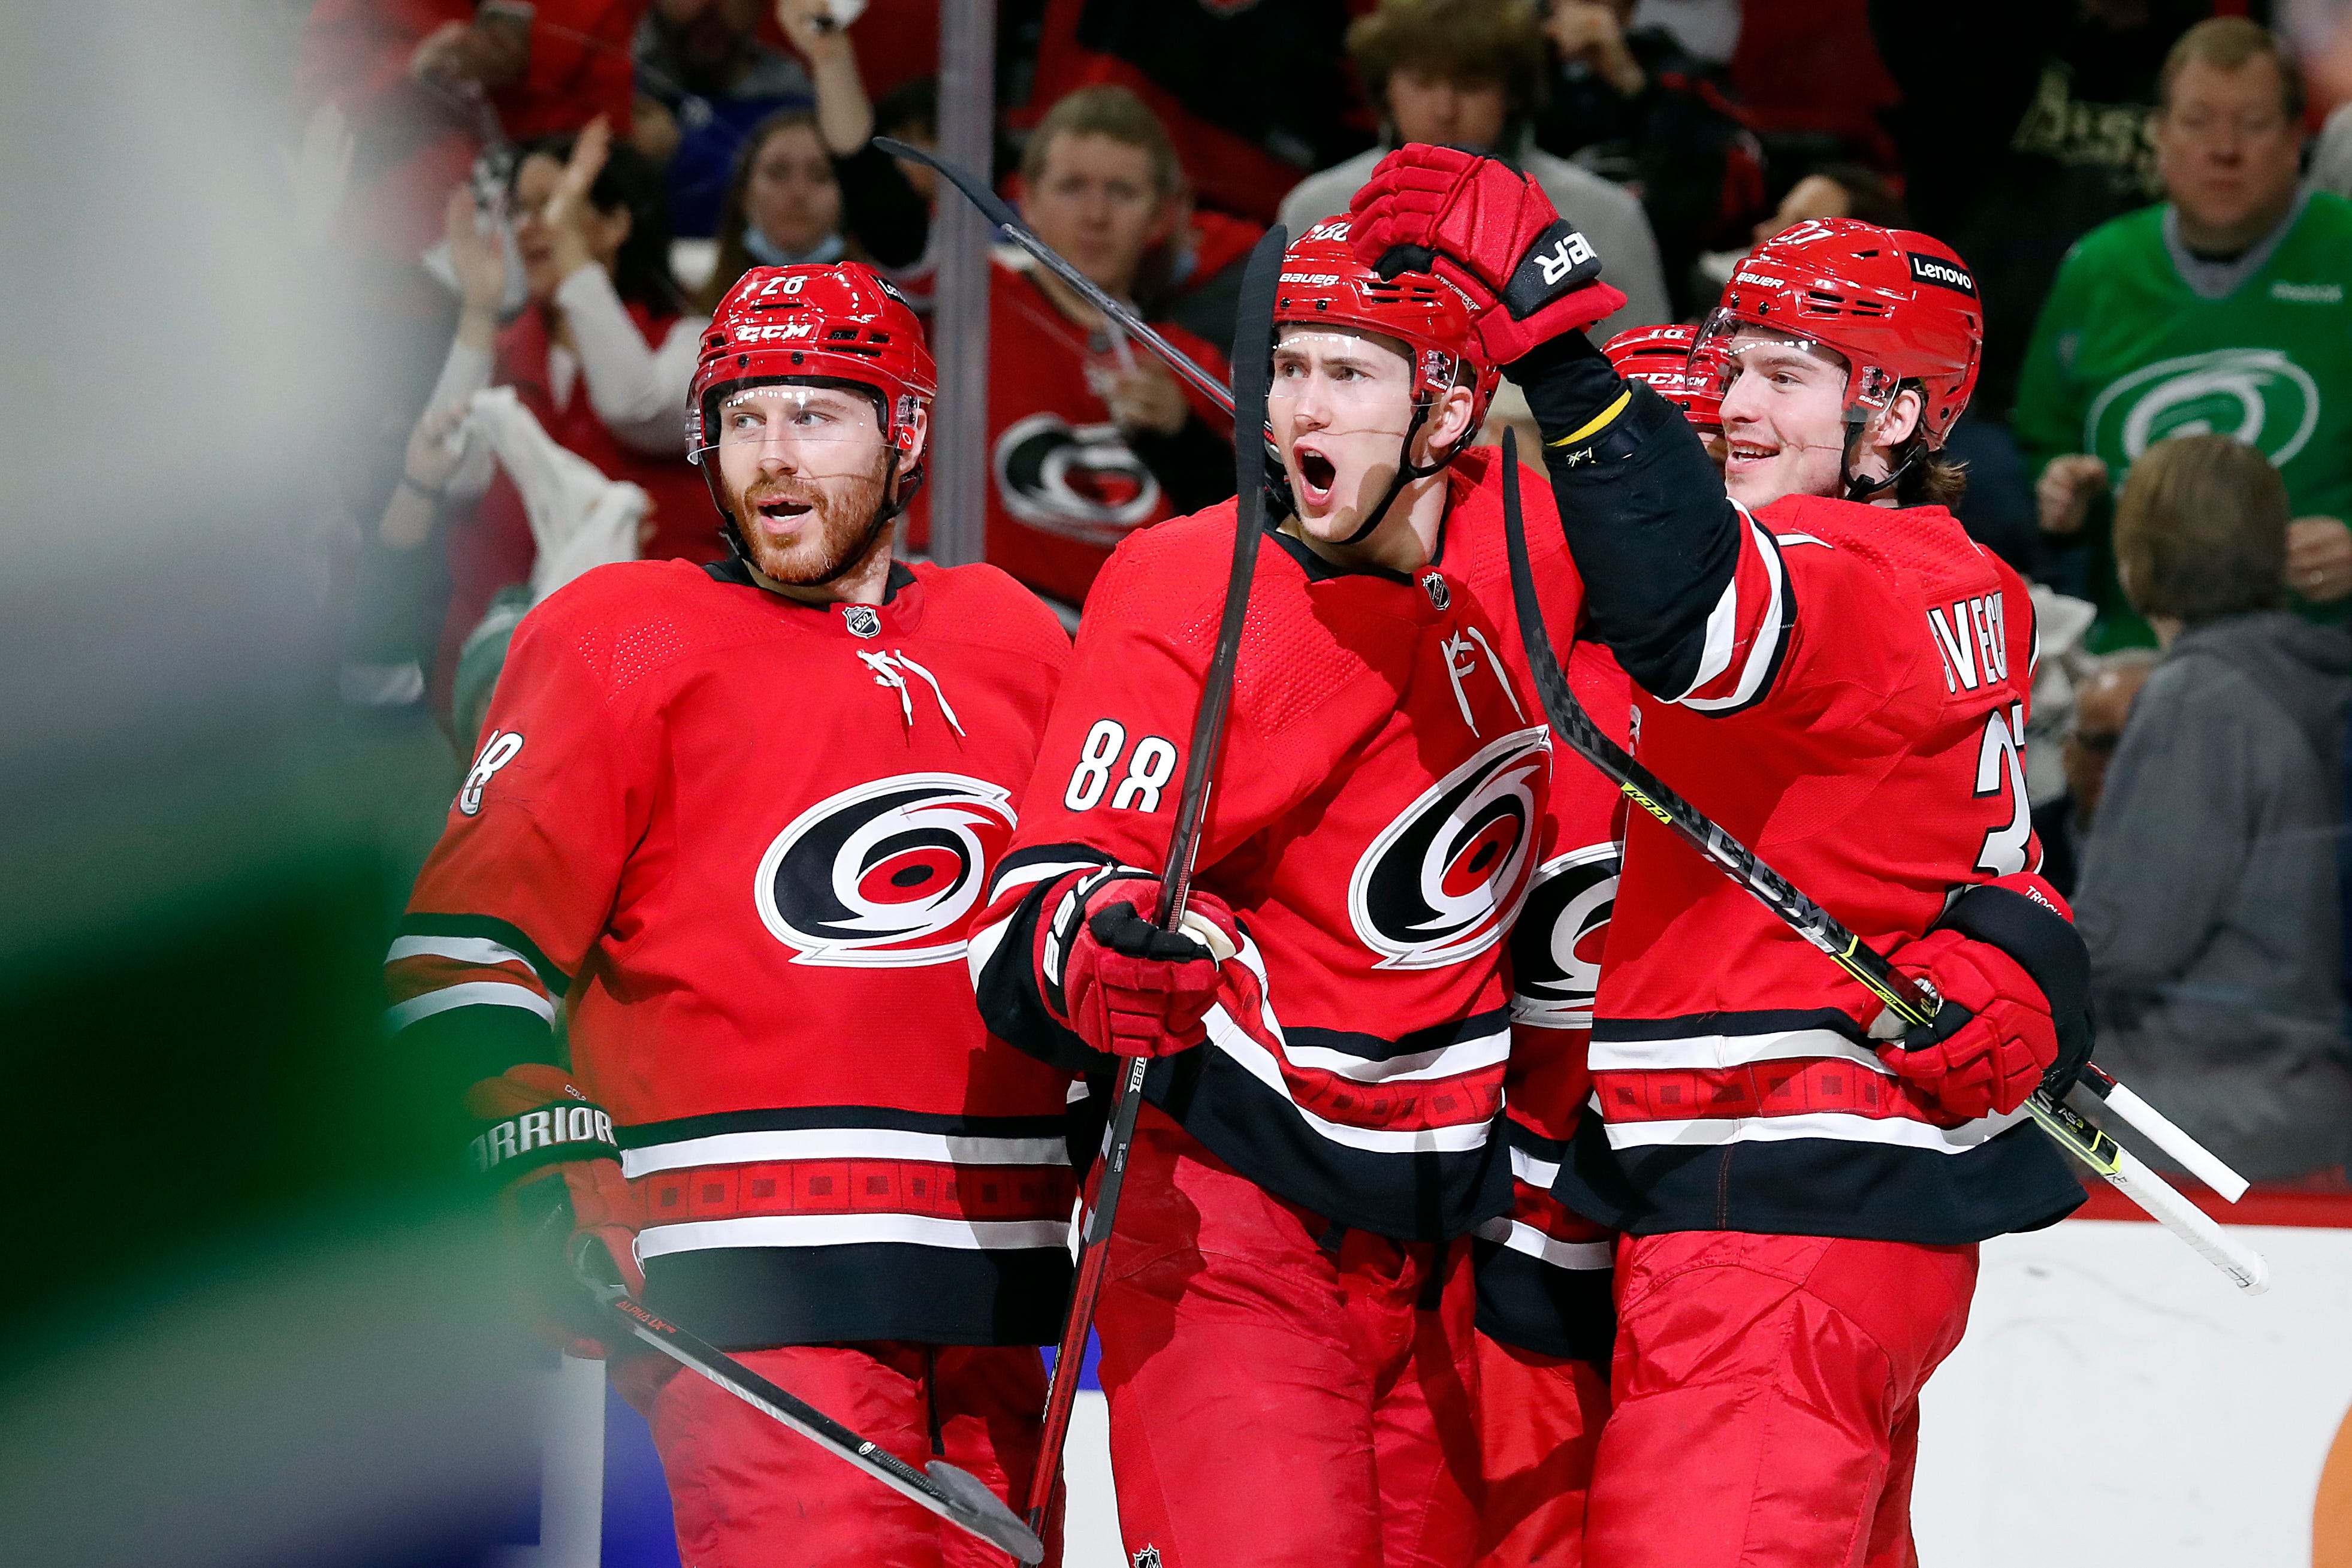 Necas produces on birthday as Hurricanes beat Canucks 4-1